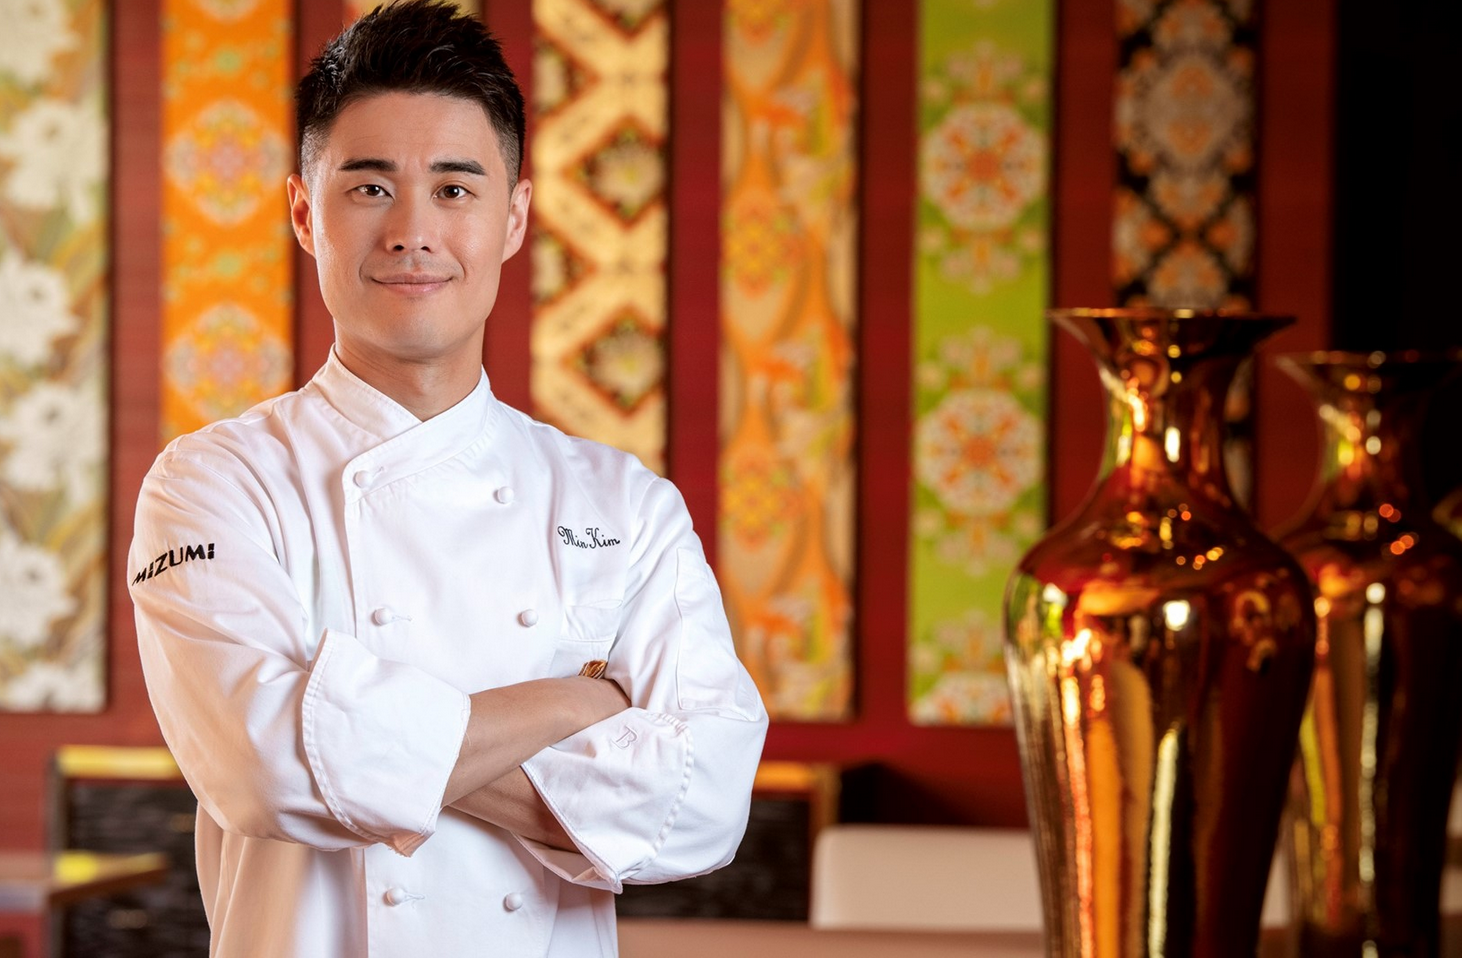 A chef stands with his arms crossed